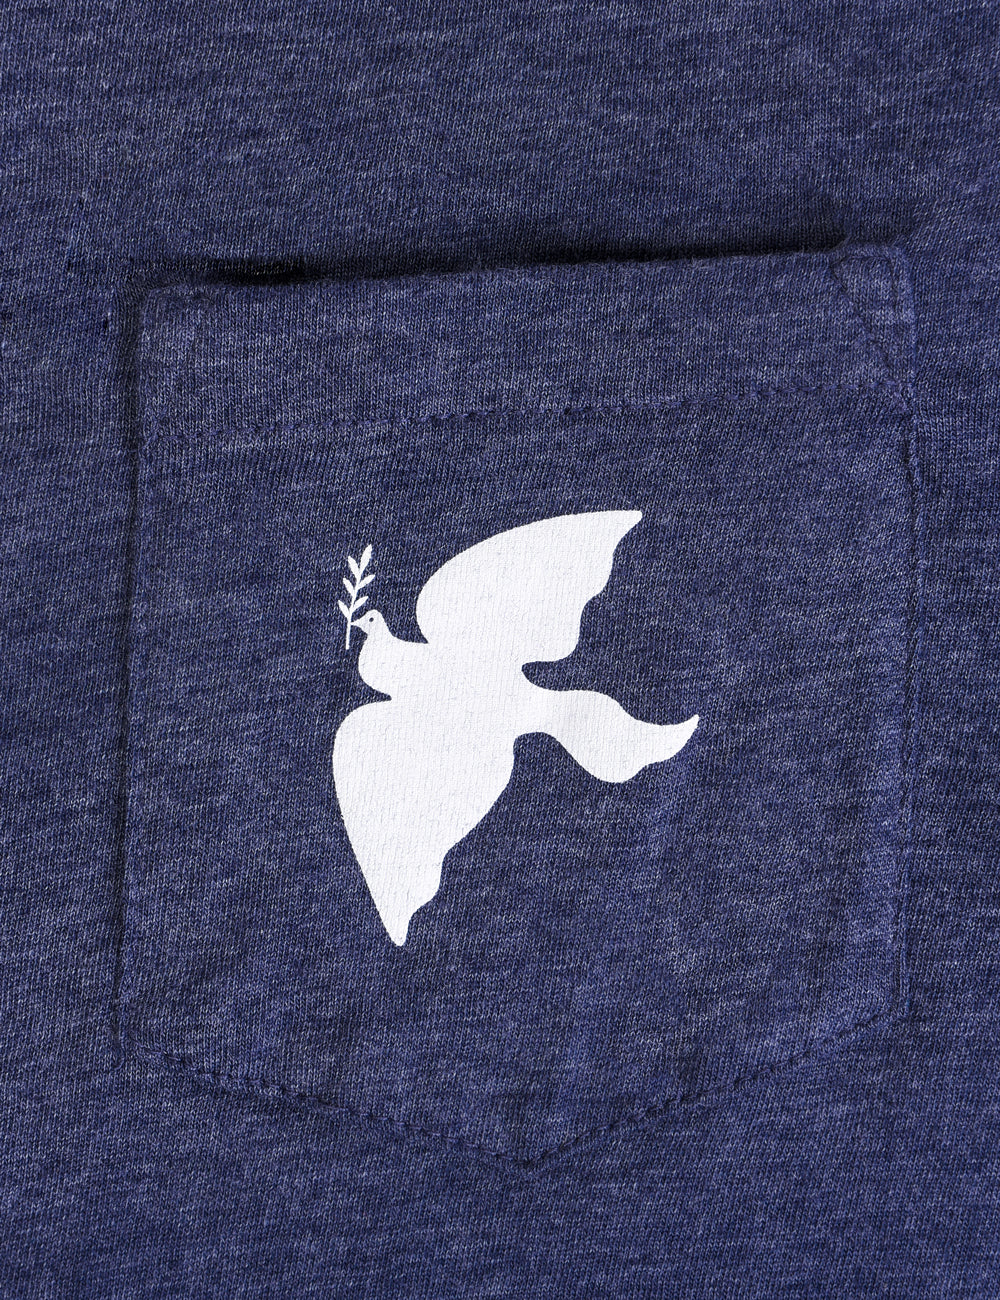 Close-up shot of the dove pocket on the t-shirt.